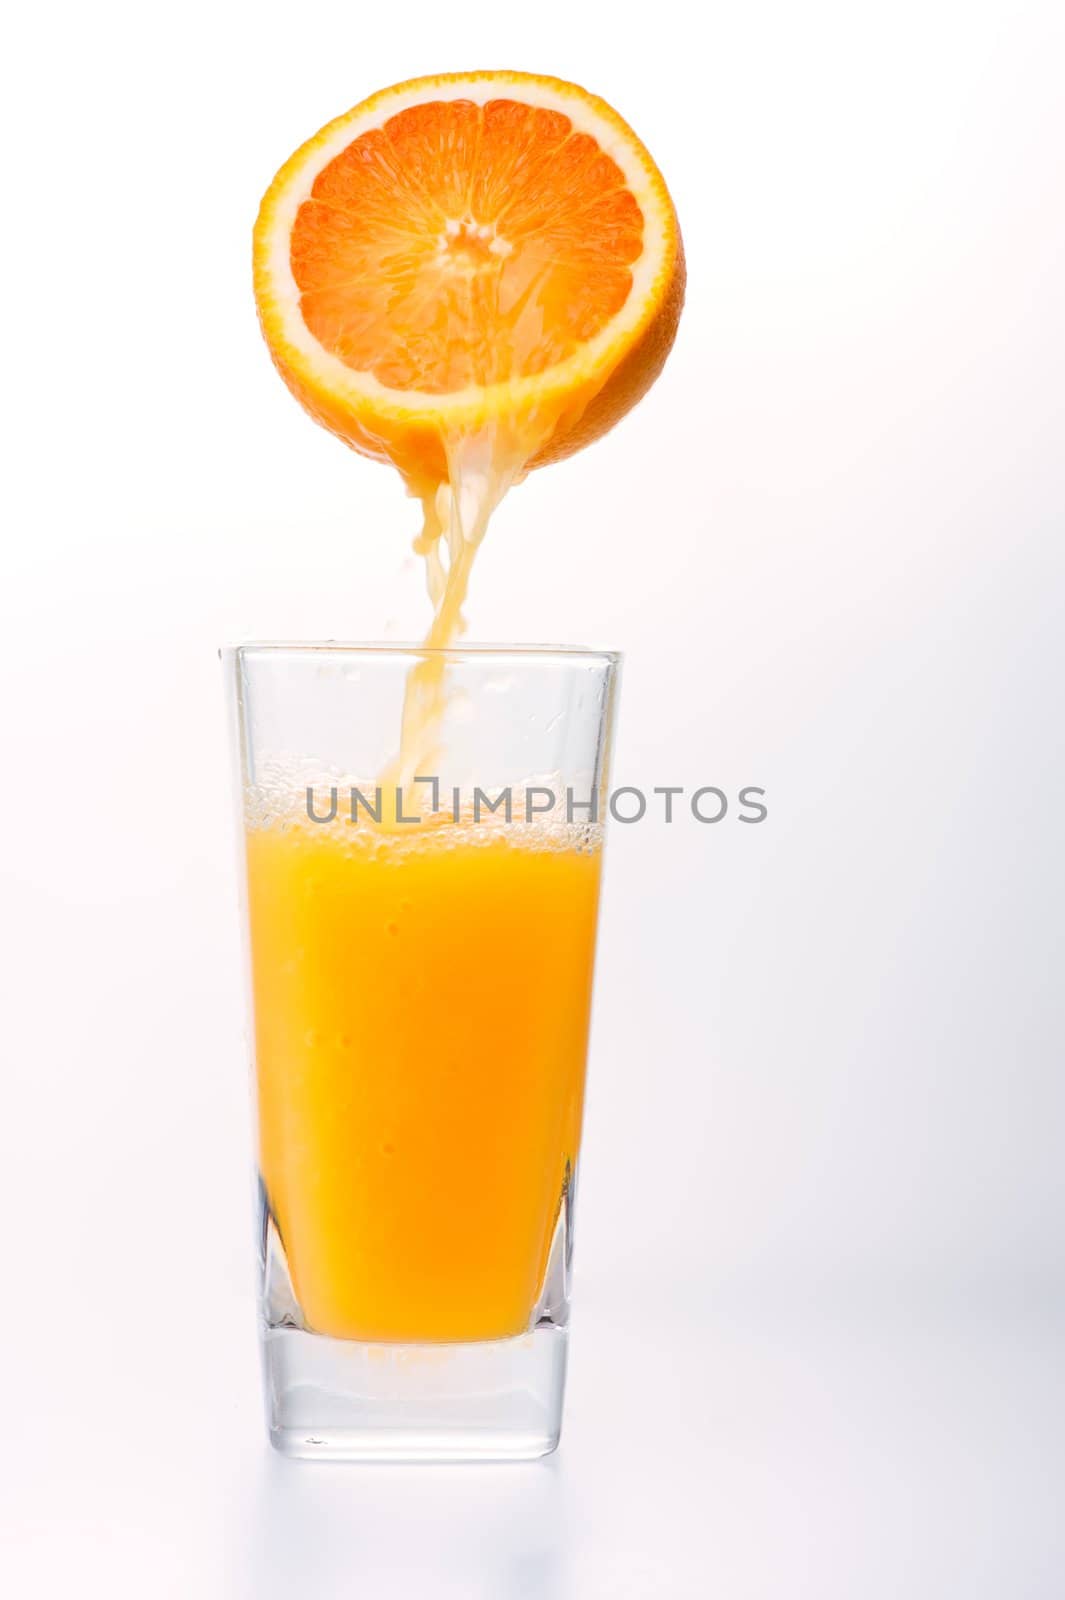 Juice to pour from juicy orange..